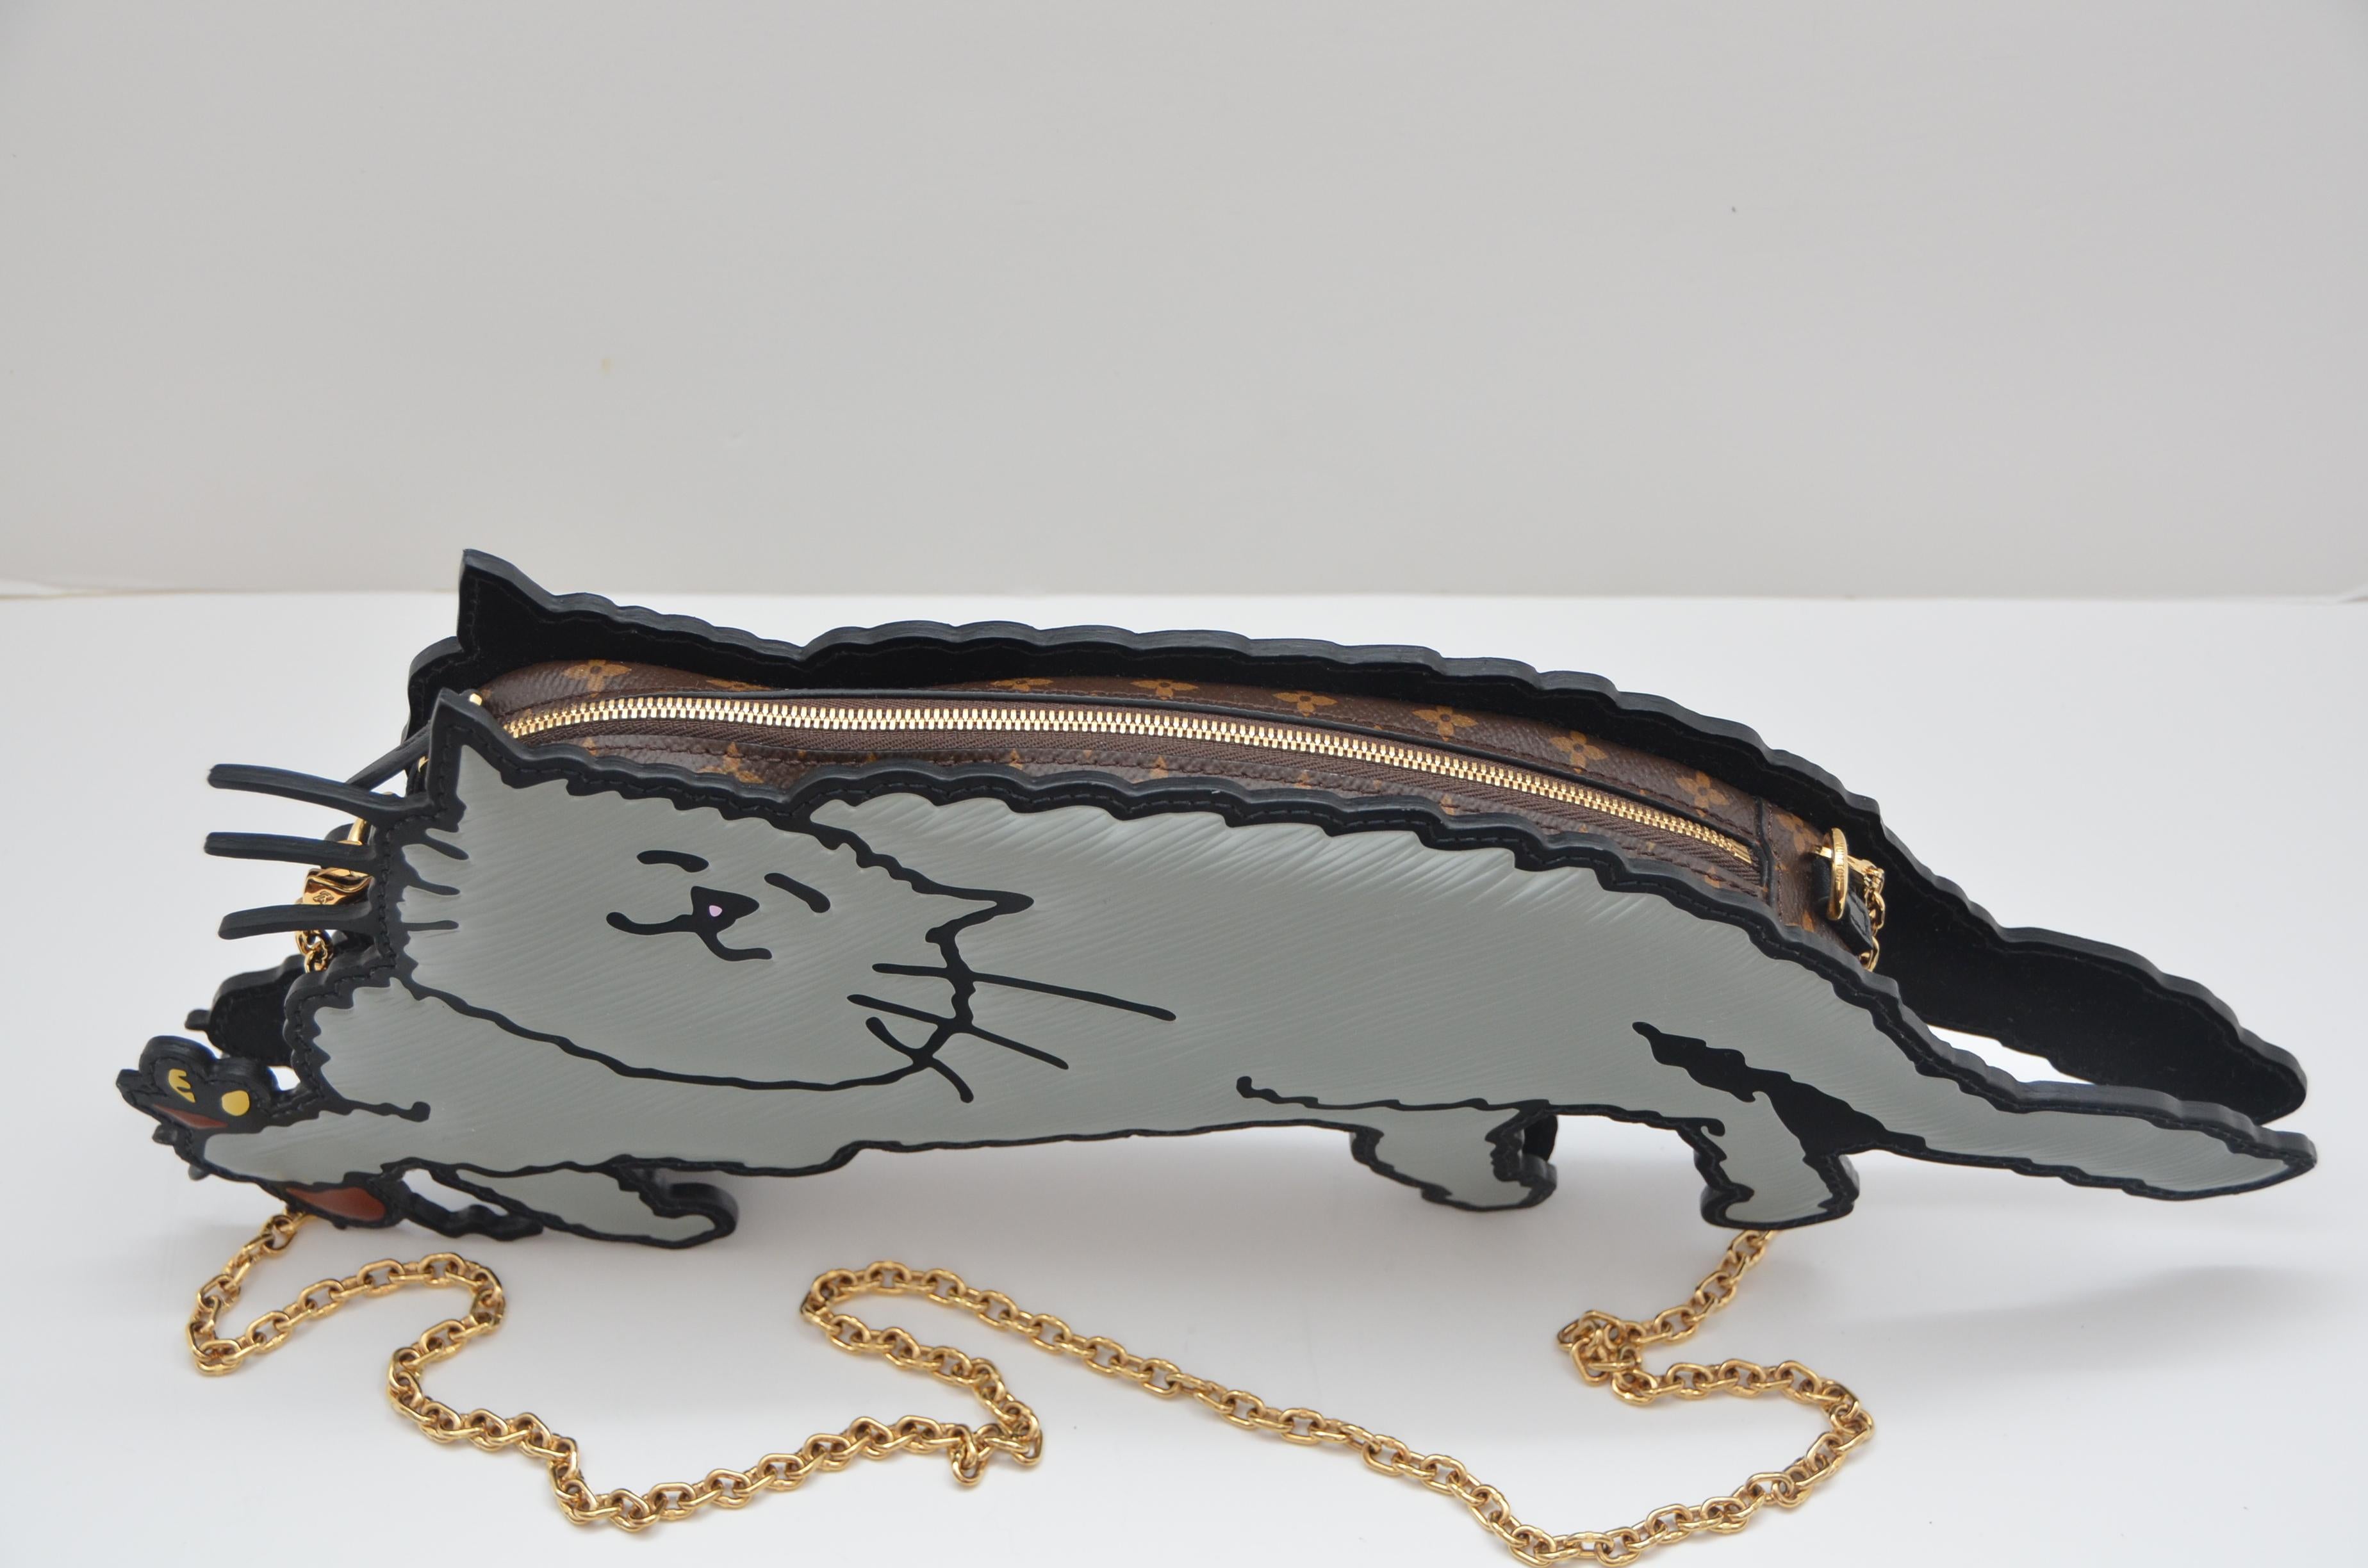 The Full Cat clutch is the perfect expression of the cats and dogs theme created by Nicolas Ghesquière and stylist Grace Coddington for the Cruise 2019 collection. Depicting a cute gray cat catching a mouse, its complex form in Epi leather and